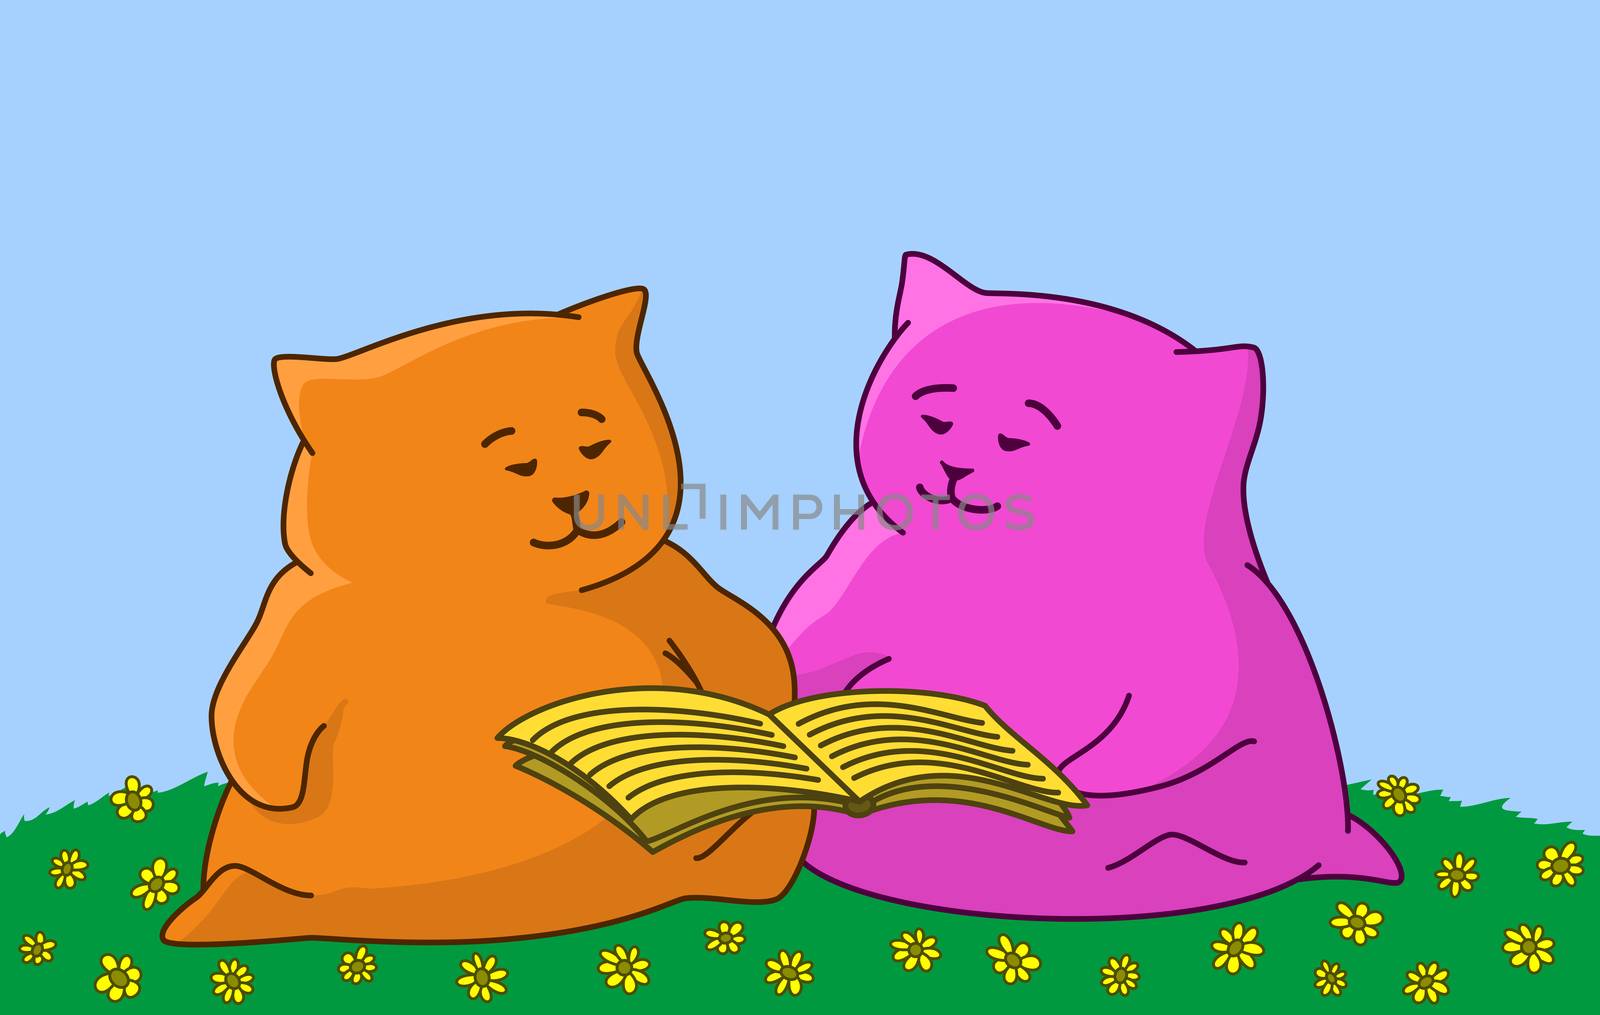 Cartoon toy animals sitting on a green meadow and reading book.